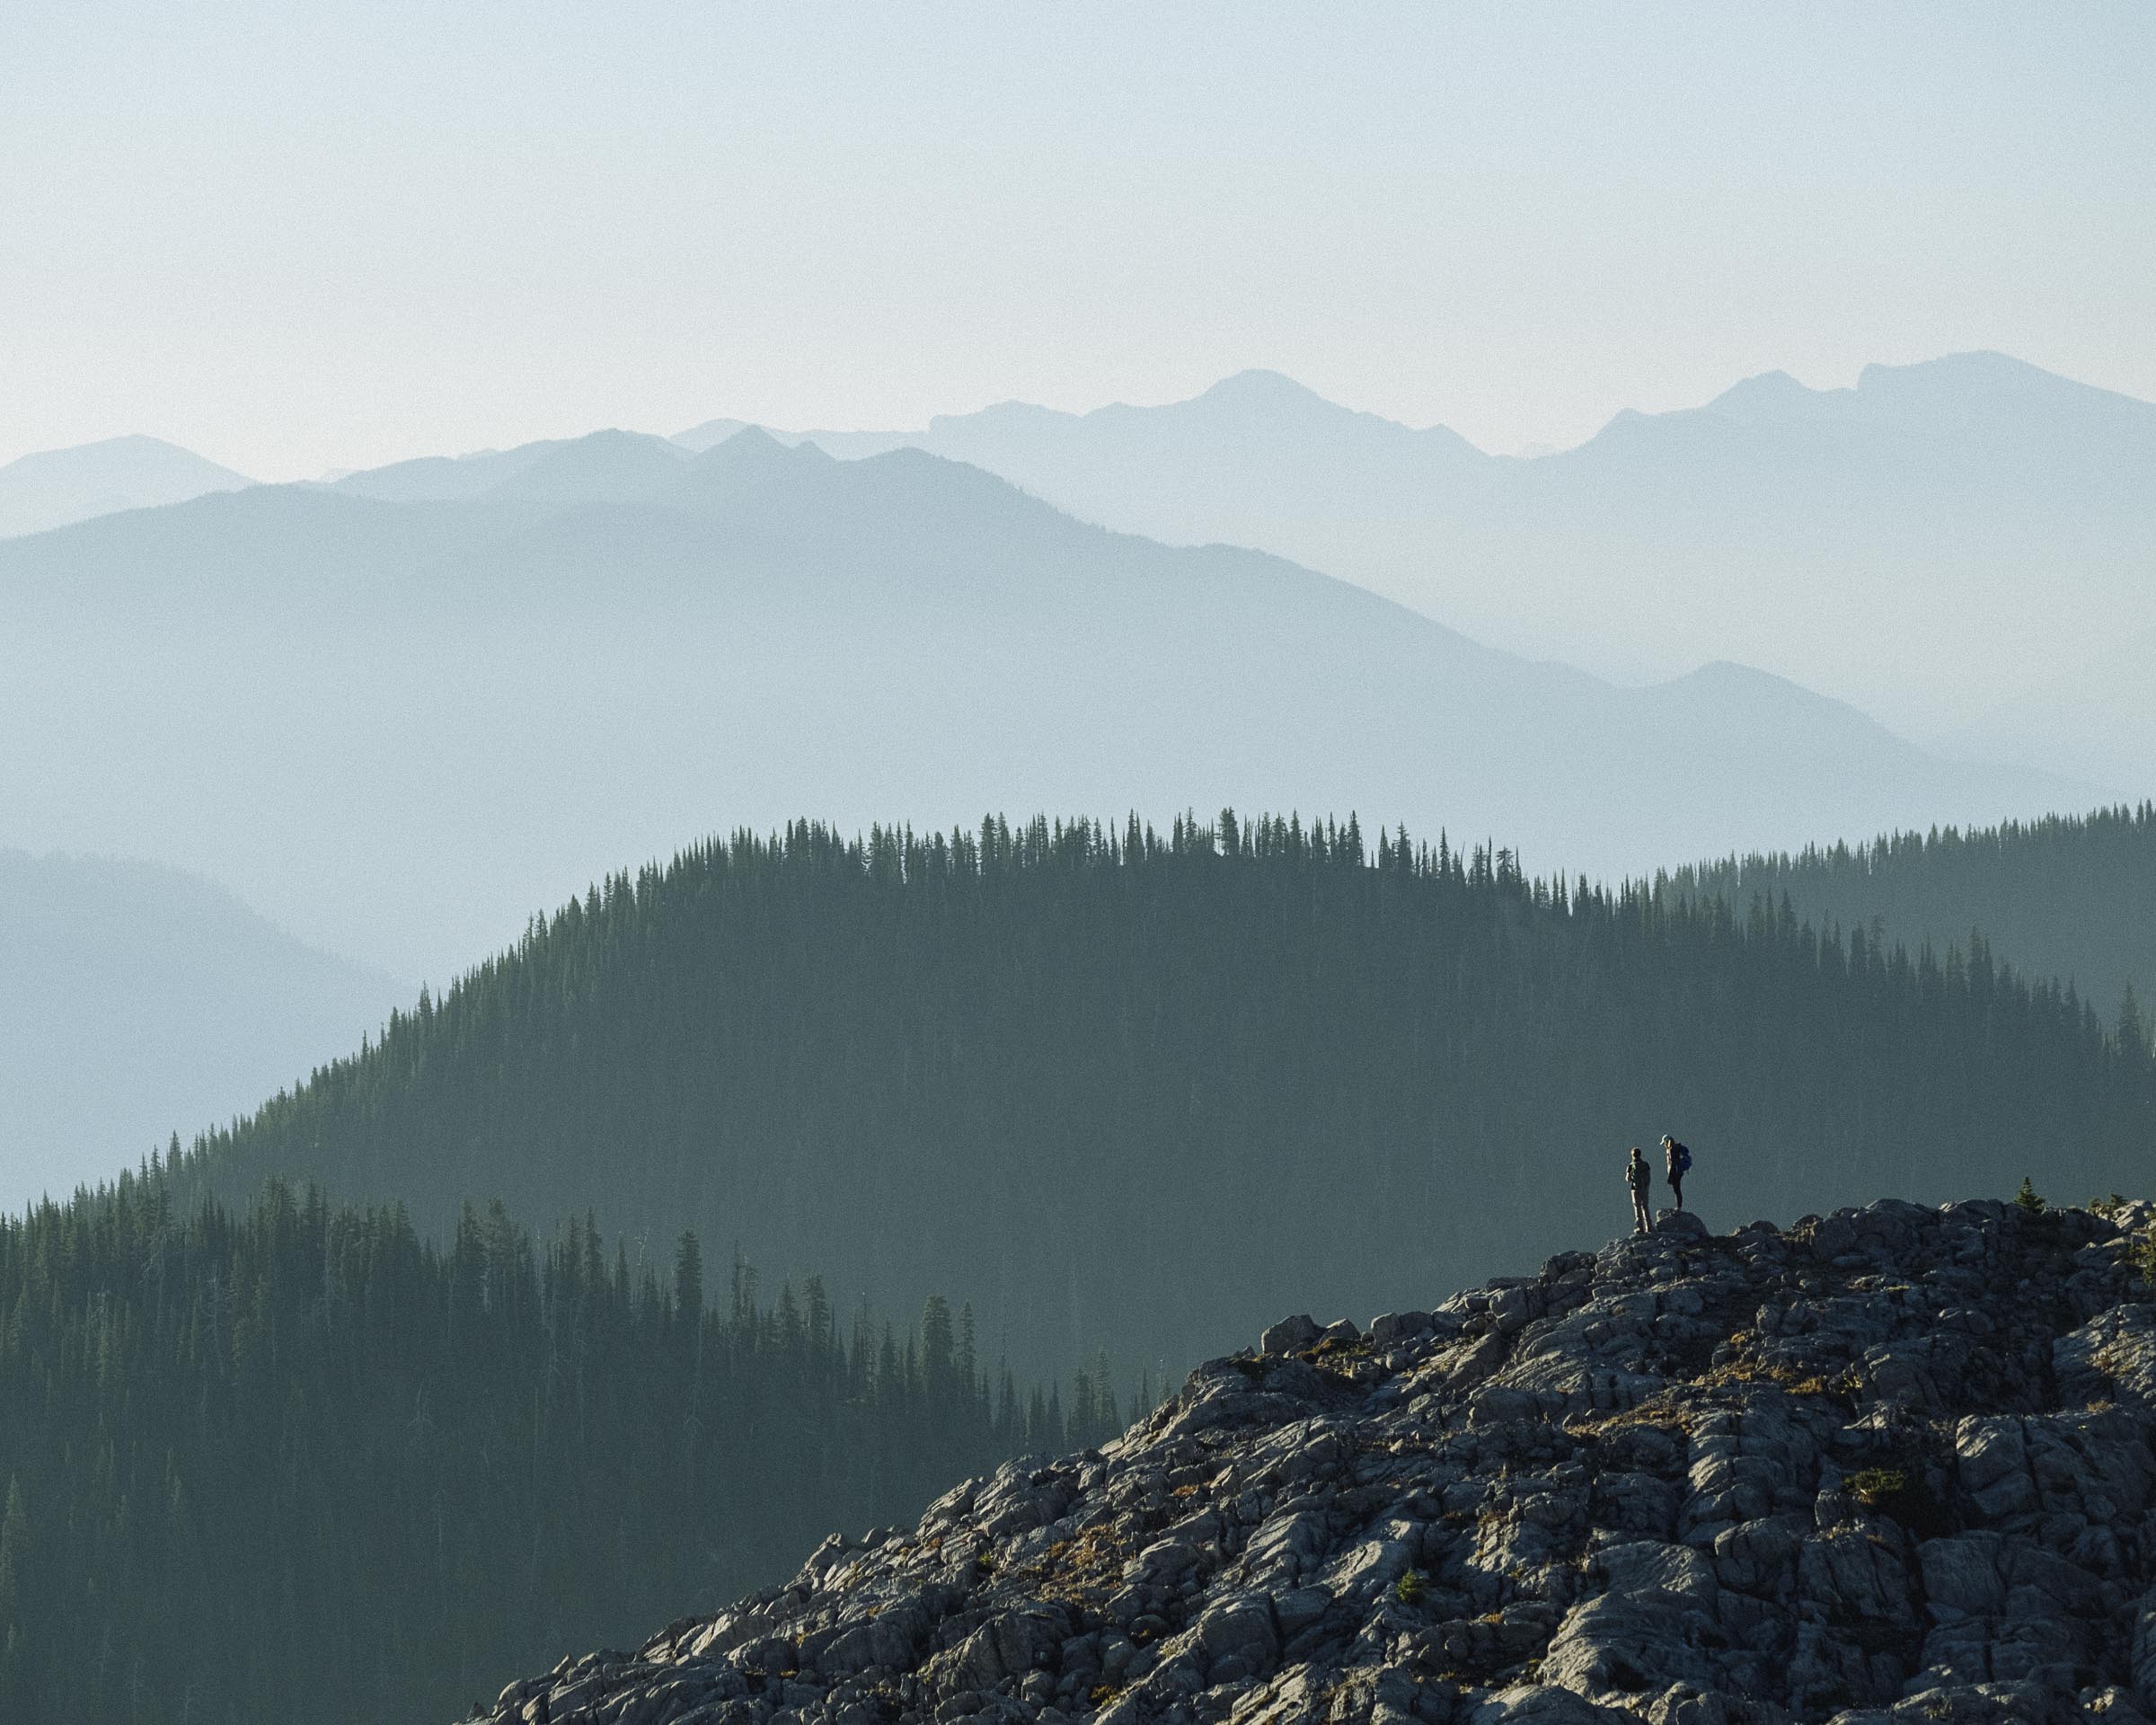 Hiking in the hazy mountain layers above Fernie, BC